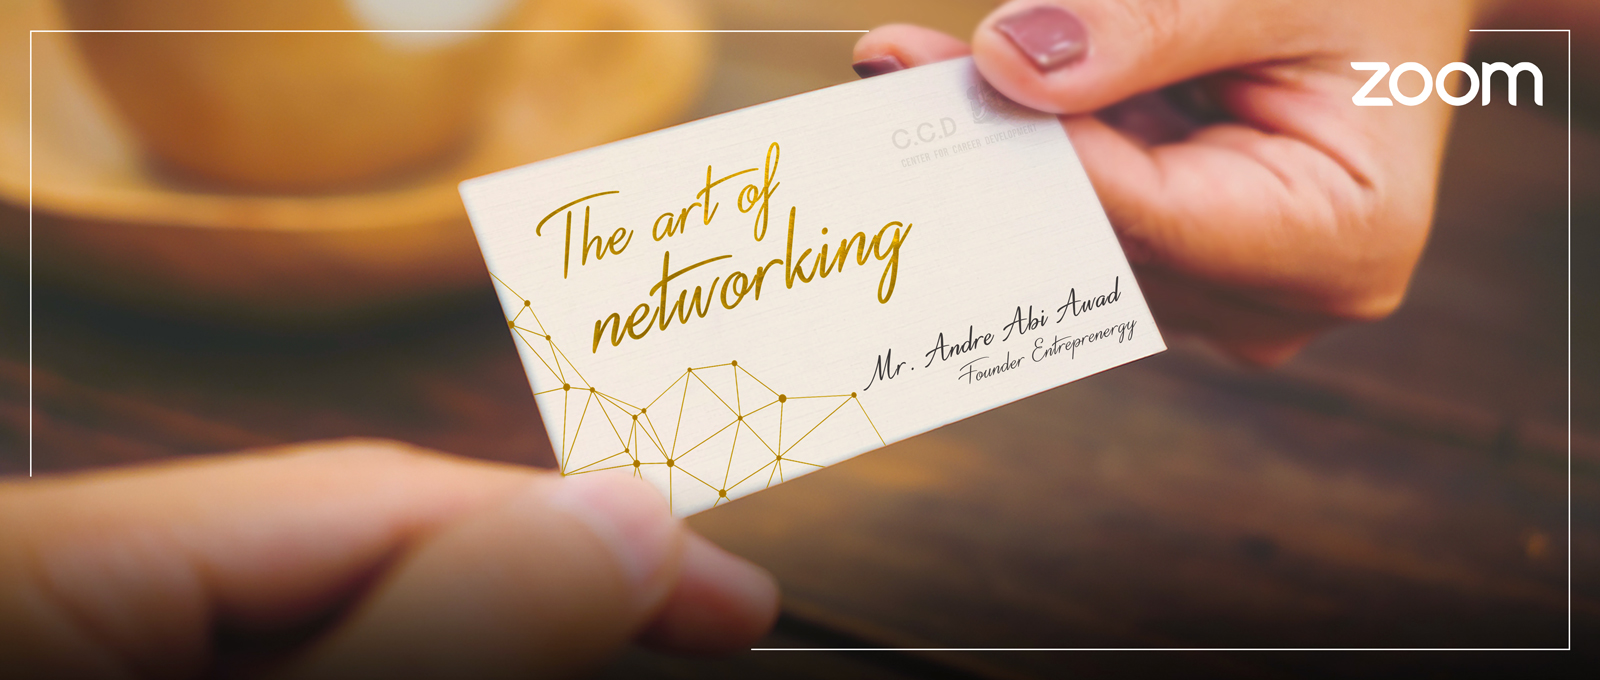 Virtual Training: The Art of Networking 